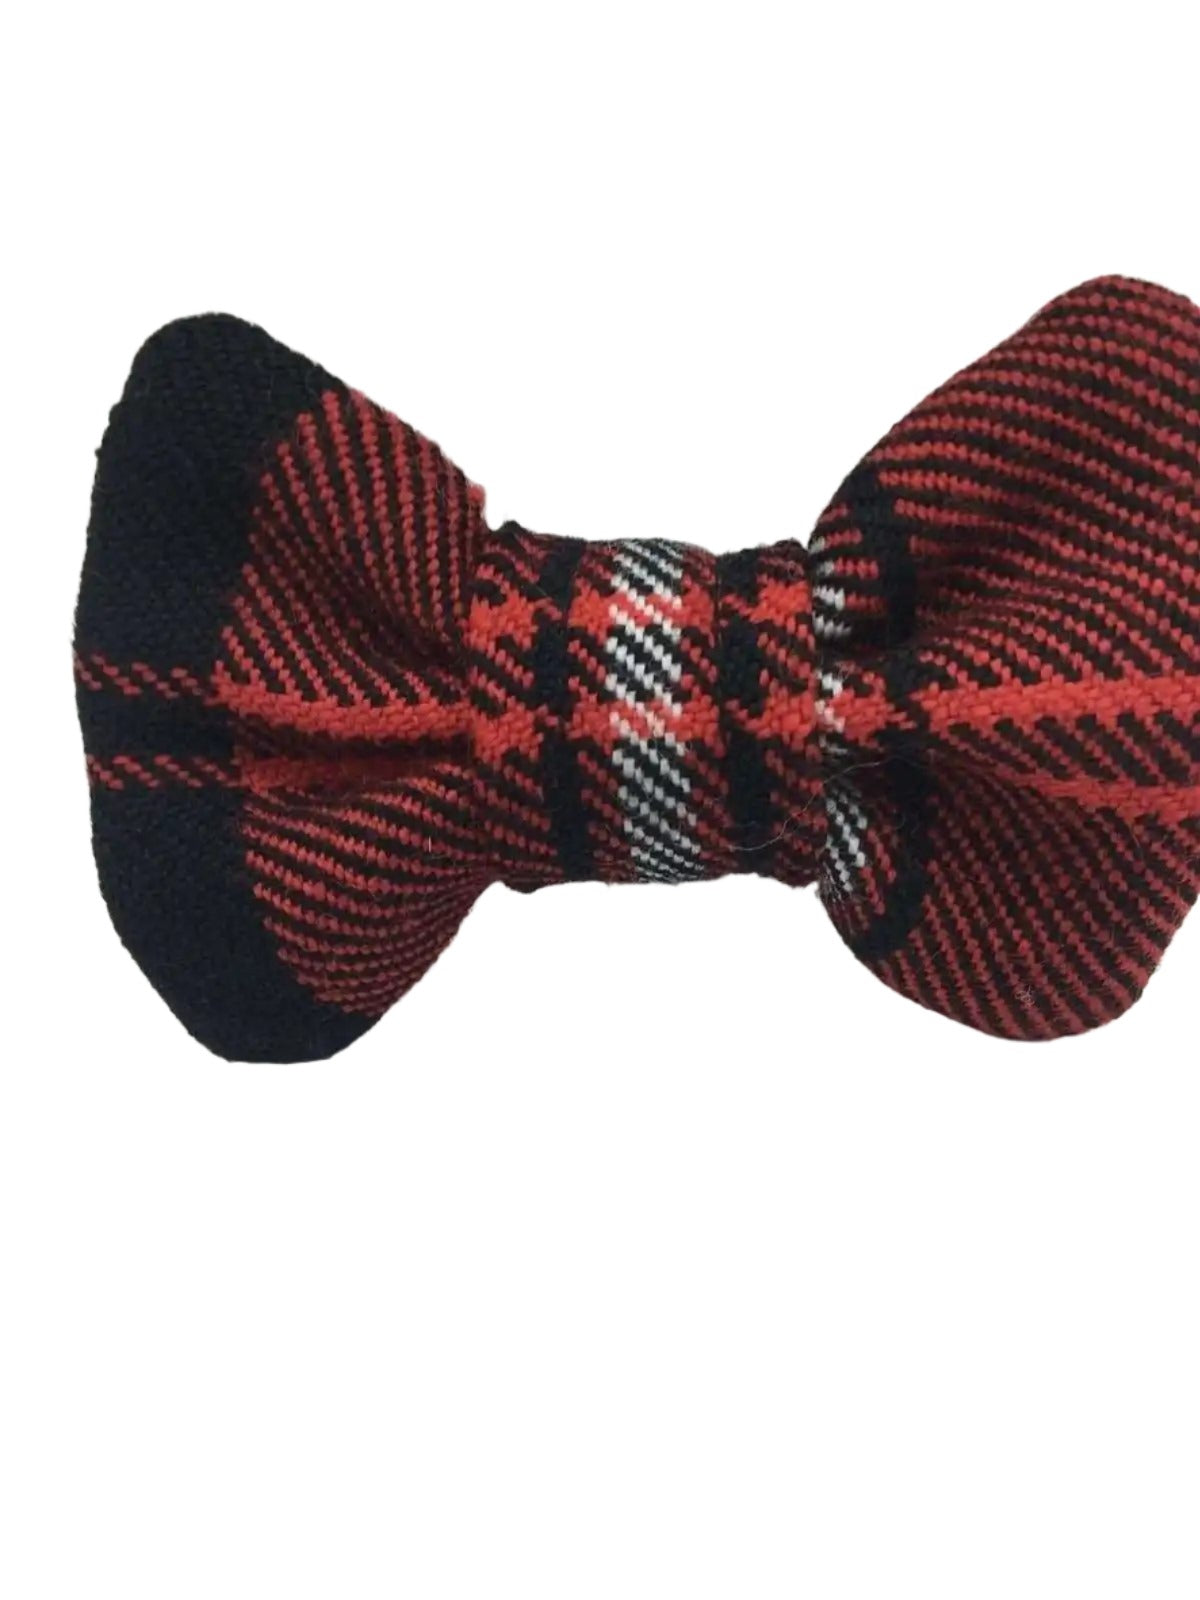 Small Red ,White and Black Tartan bow tie for your dog.